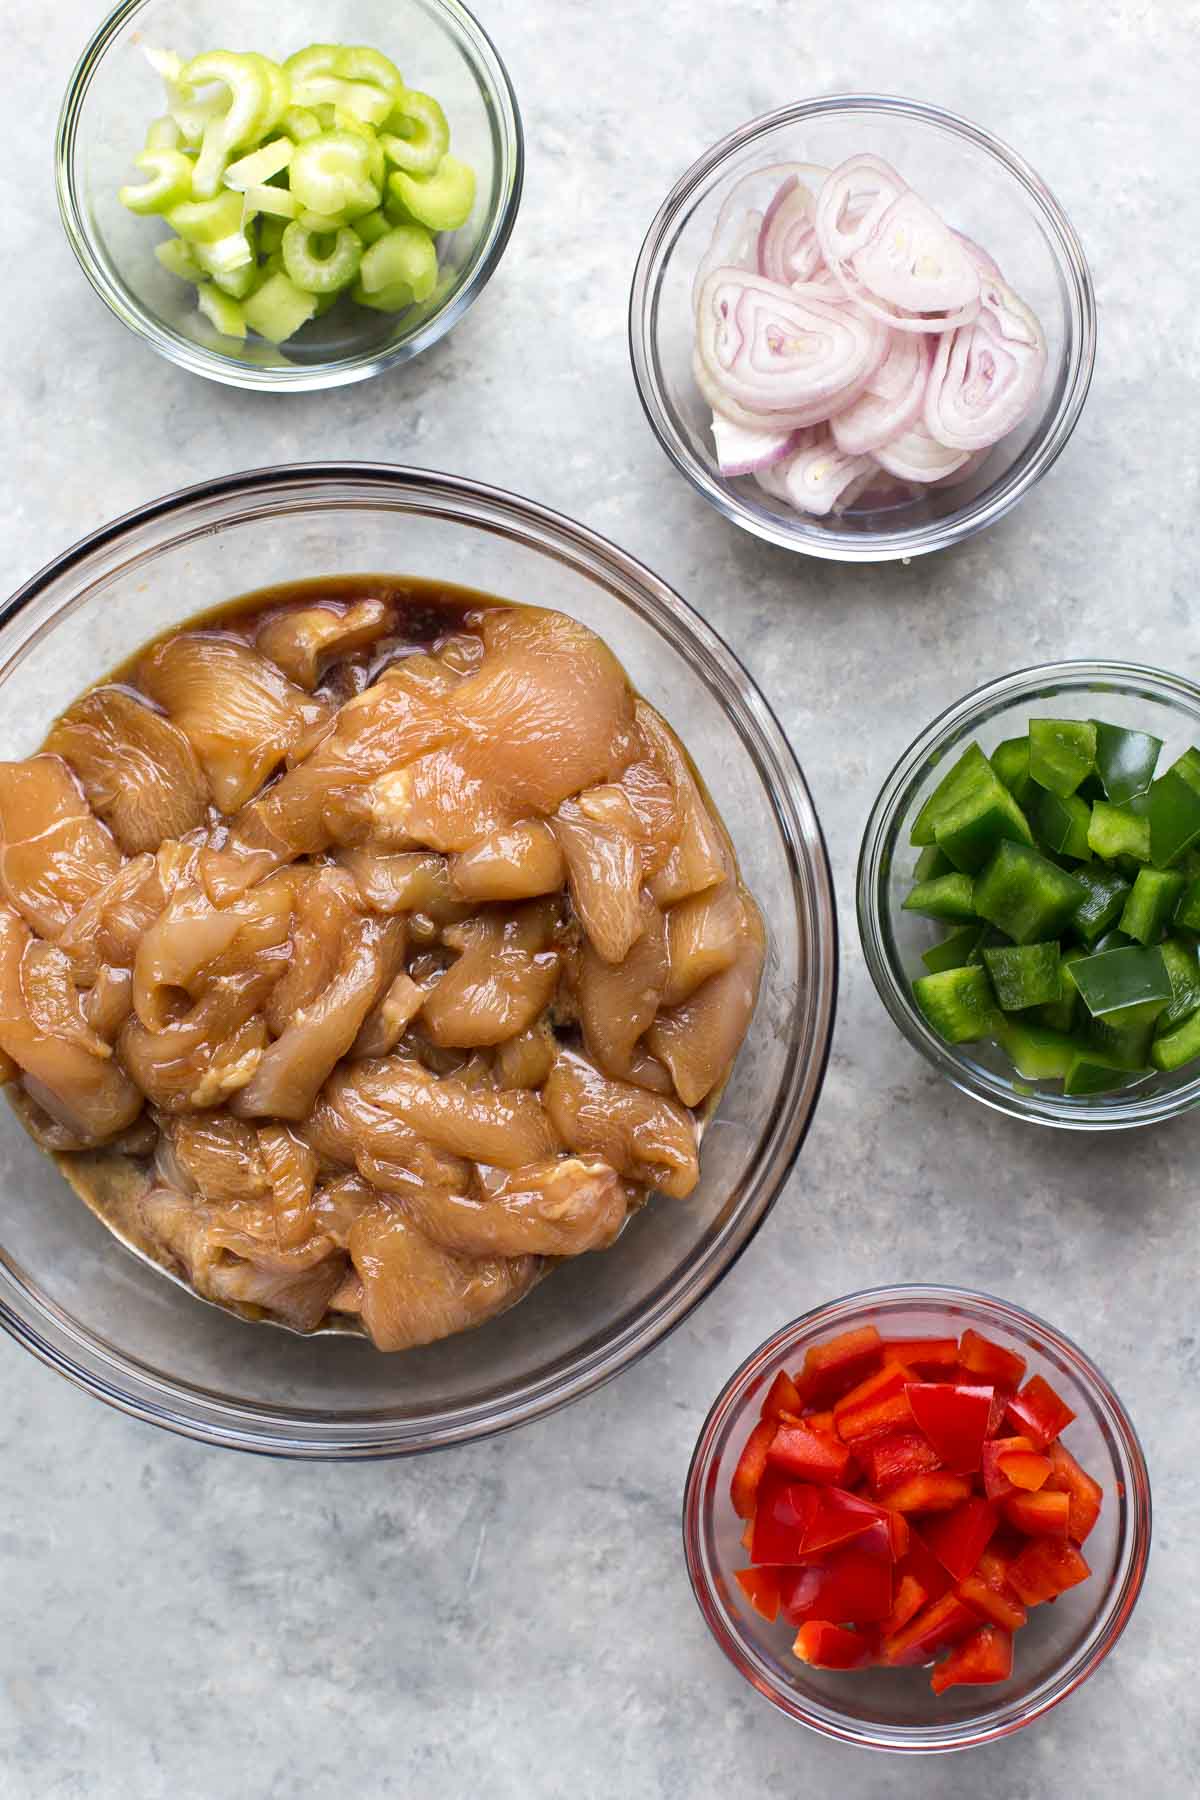 mise en place with marinating chicken for kung pao chicken recipe